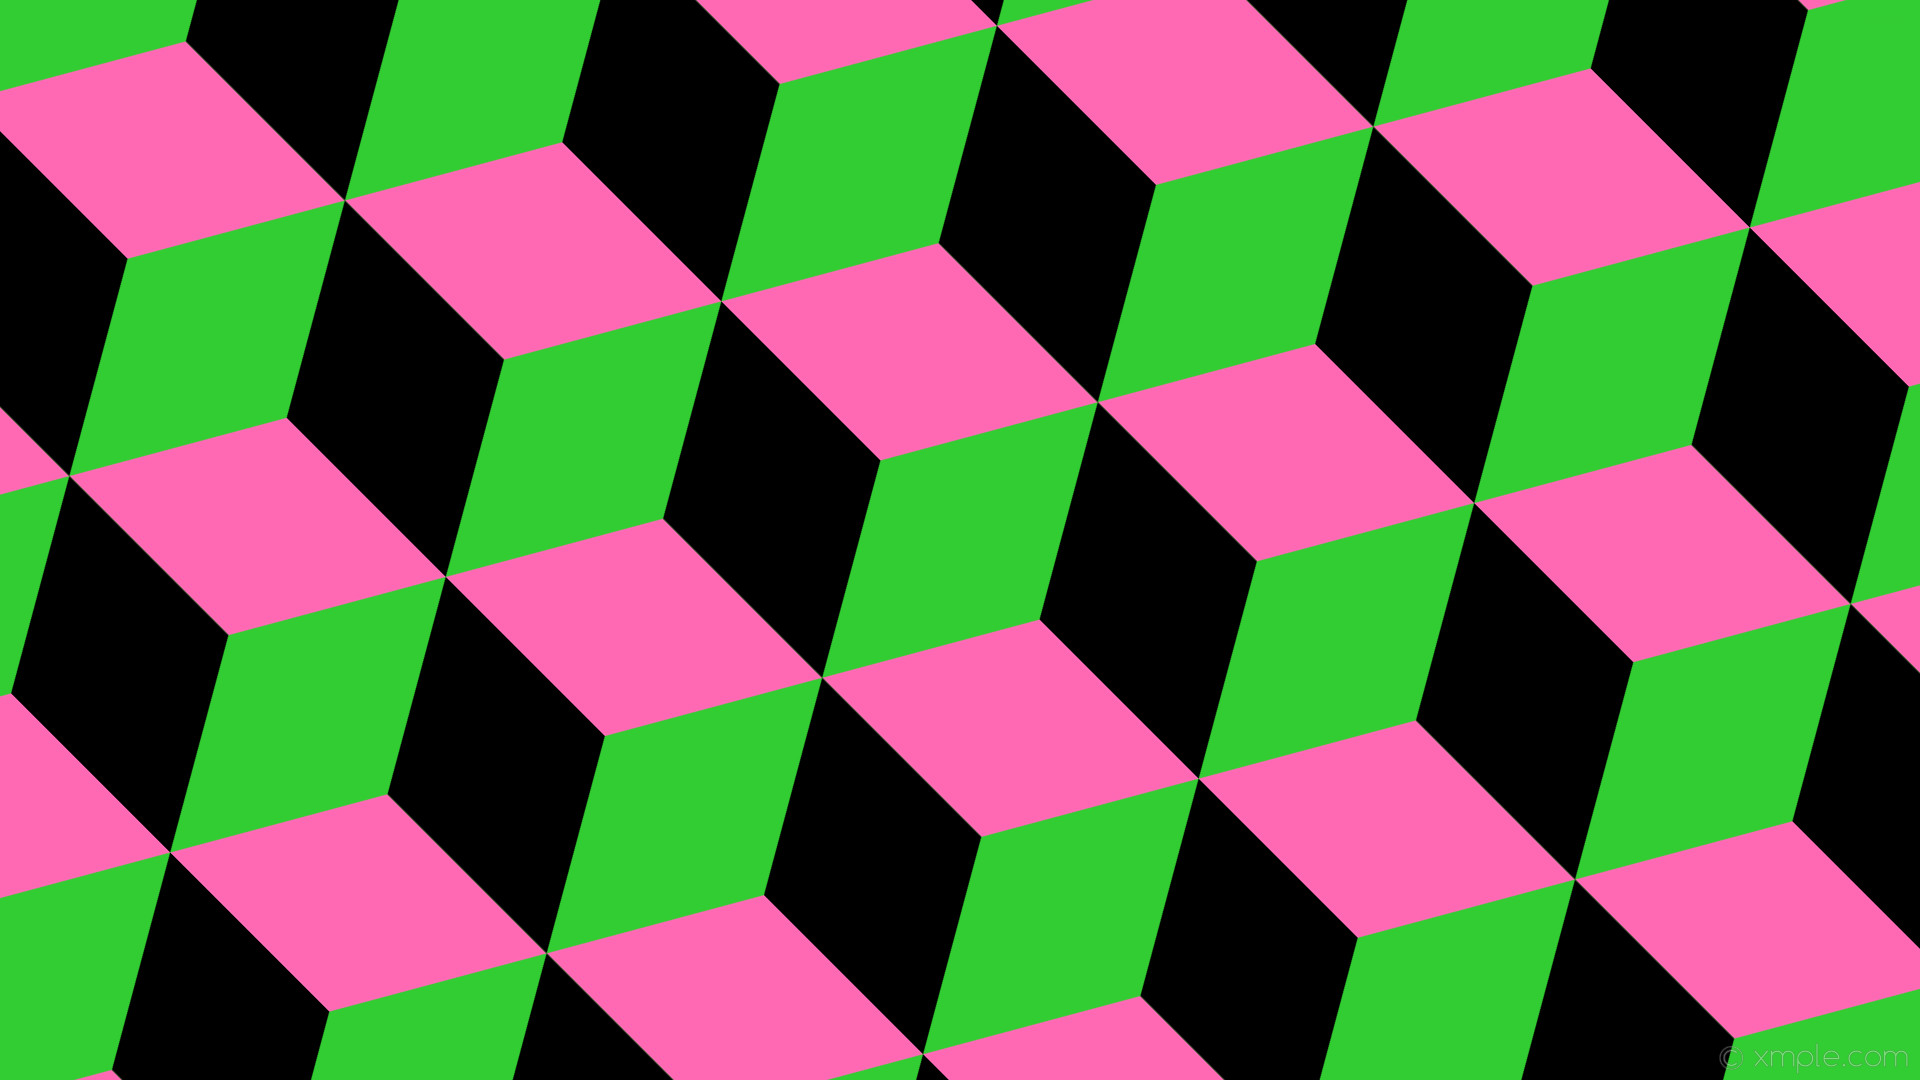 A green and pink checkered pattern against a black background - Hot pink